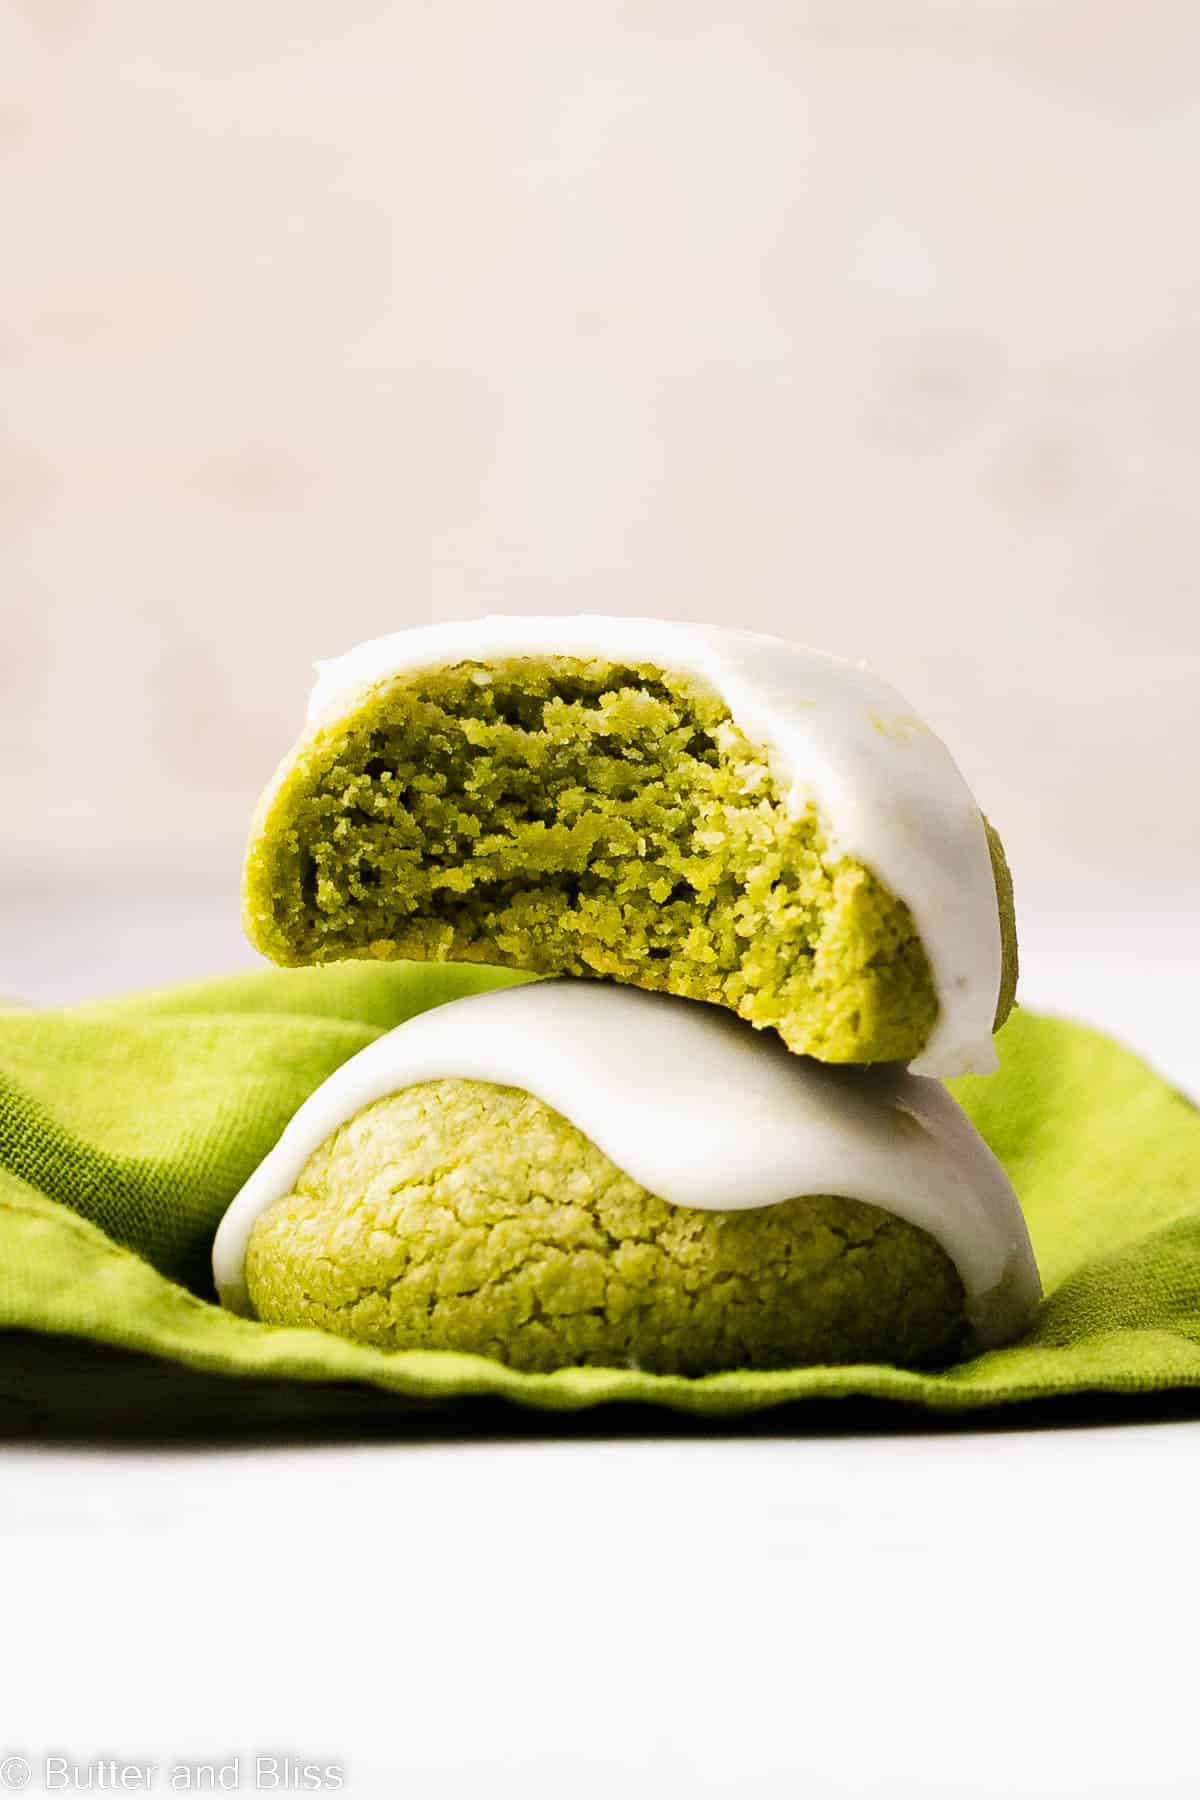 Bite shot of a beautiful lemon iced gluten free matcha cookie stacked on another on a table.